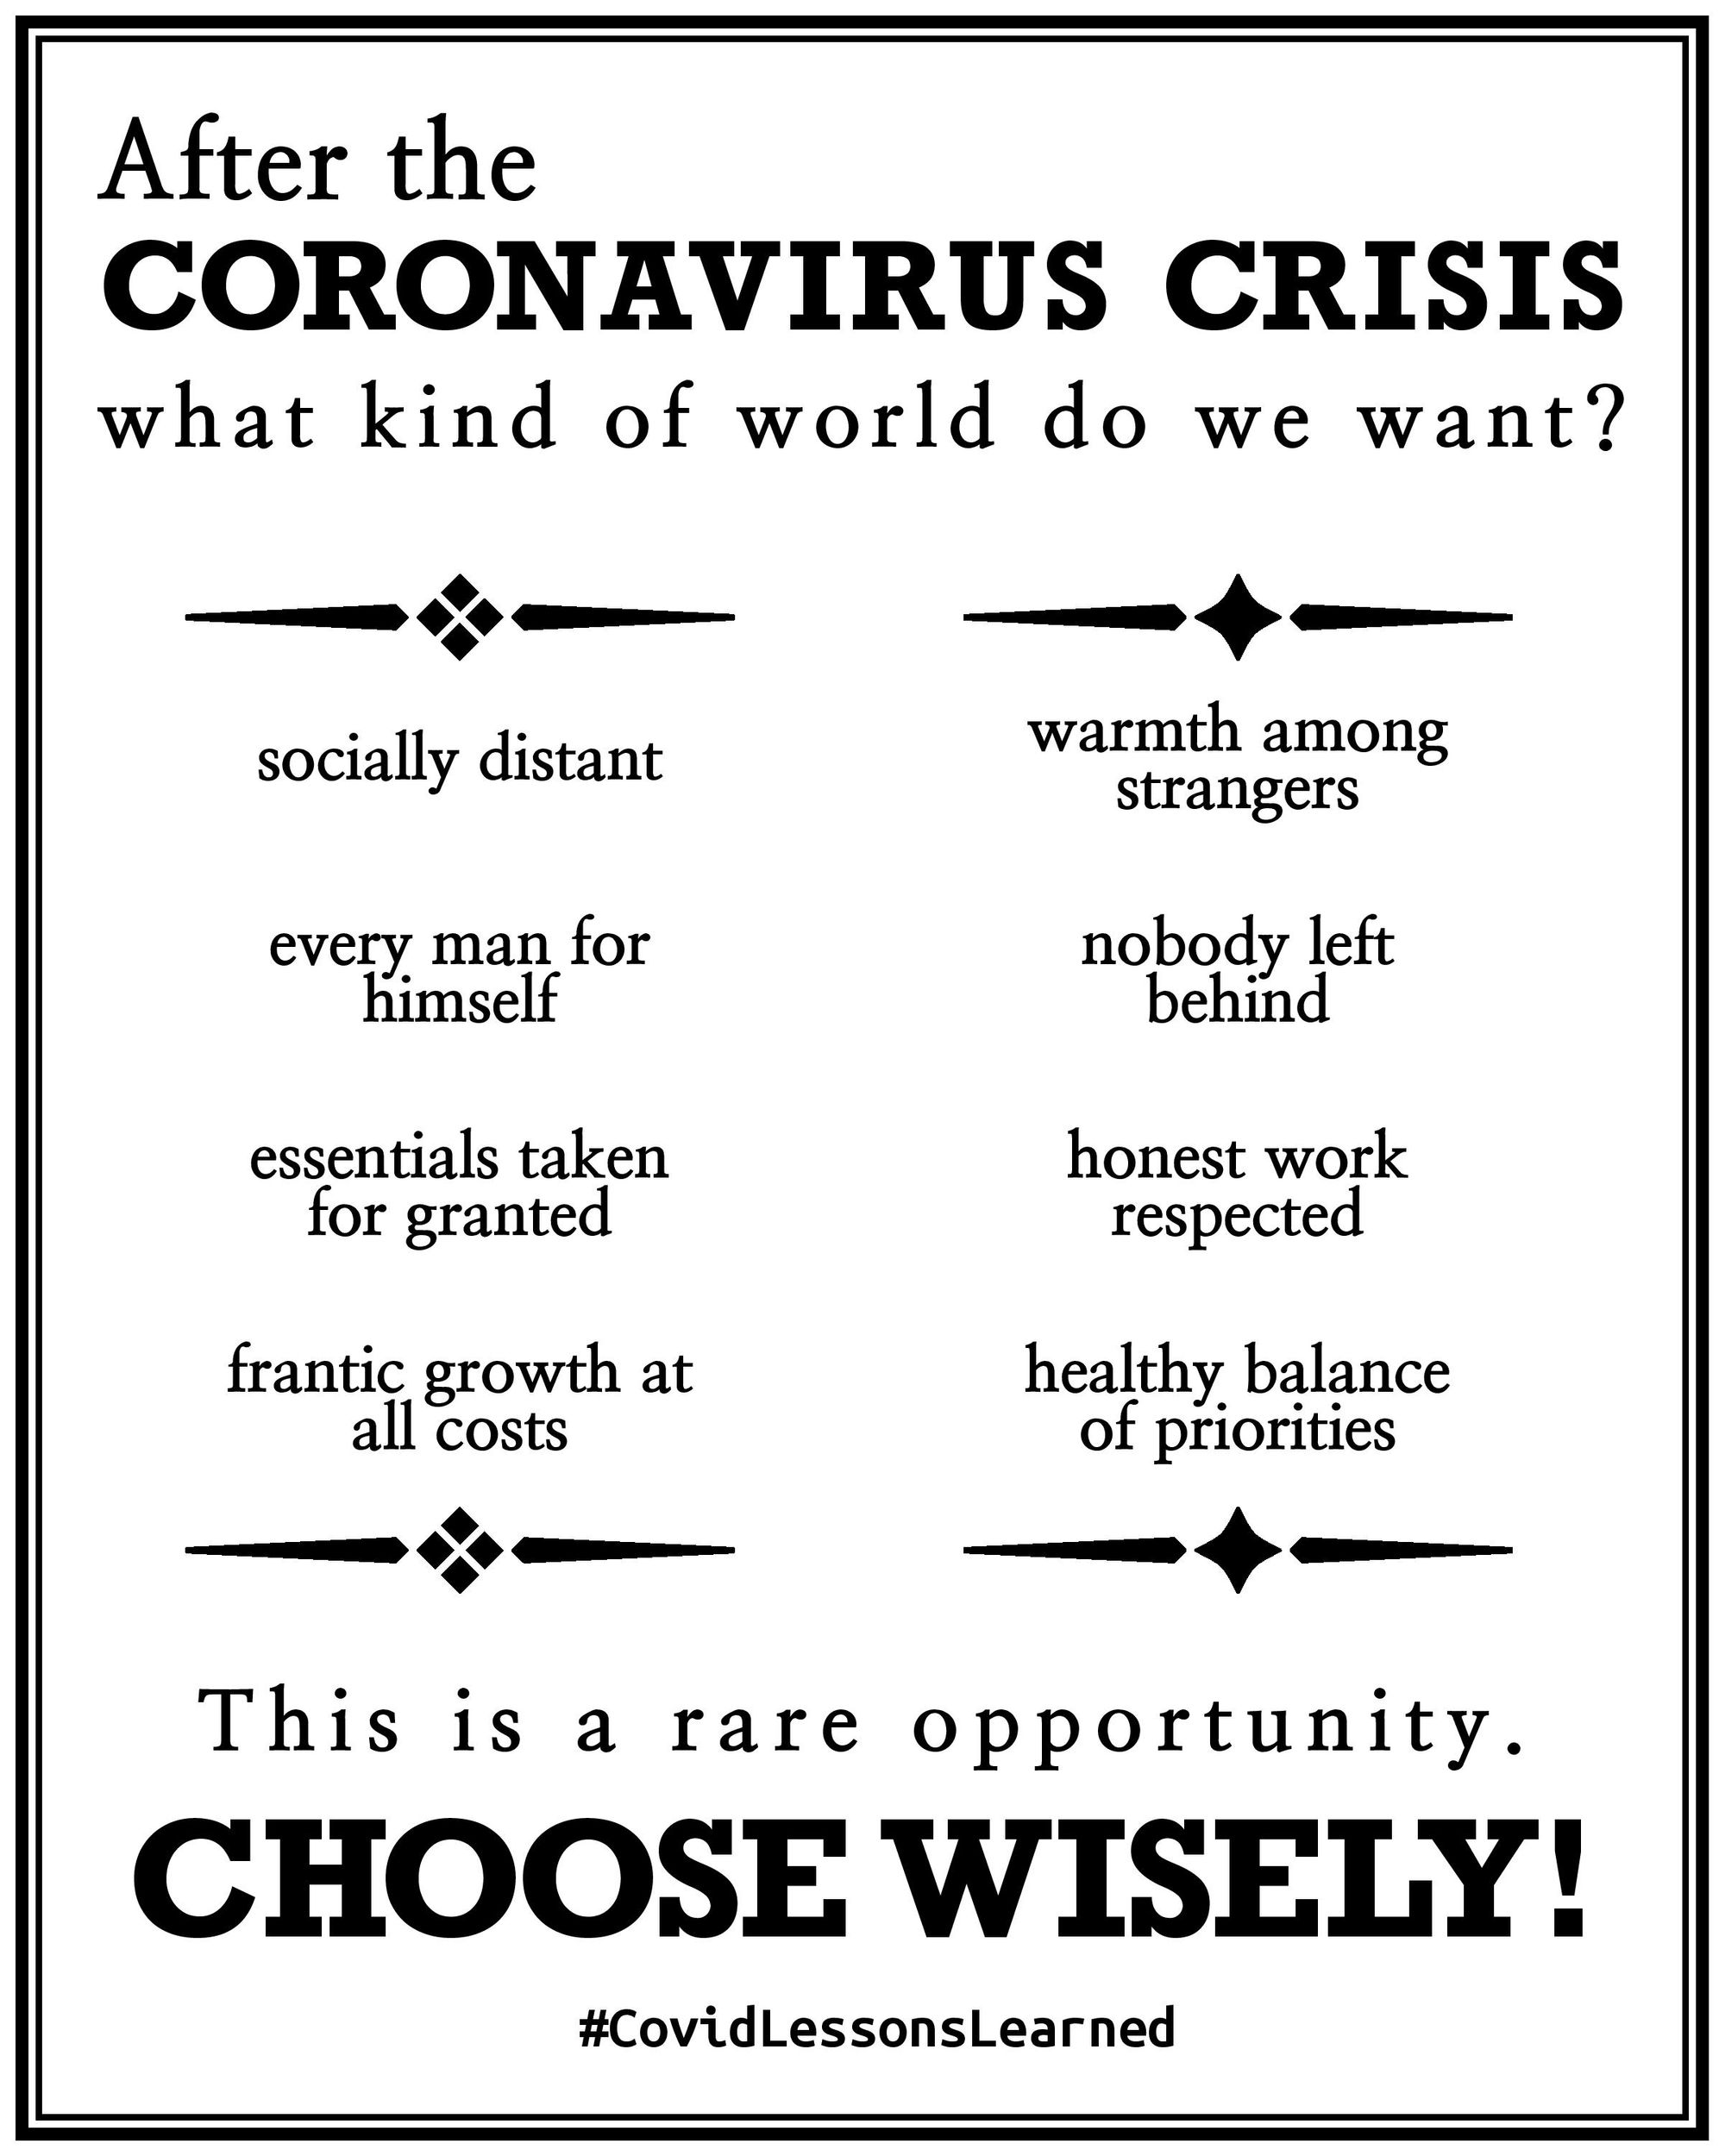 a poster that reads: “After the coronavirus crisis what kind of world do we want? Socially distant or warmth among strangers? Every man for himself or nobody left behind? Essentials taken for granted or honest work respected? Frantic growth at all costs or healthy balance of priorities? This is a rare opportunity. Choose wisely!”"